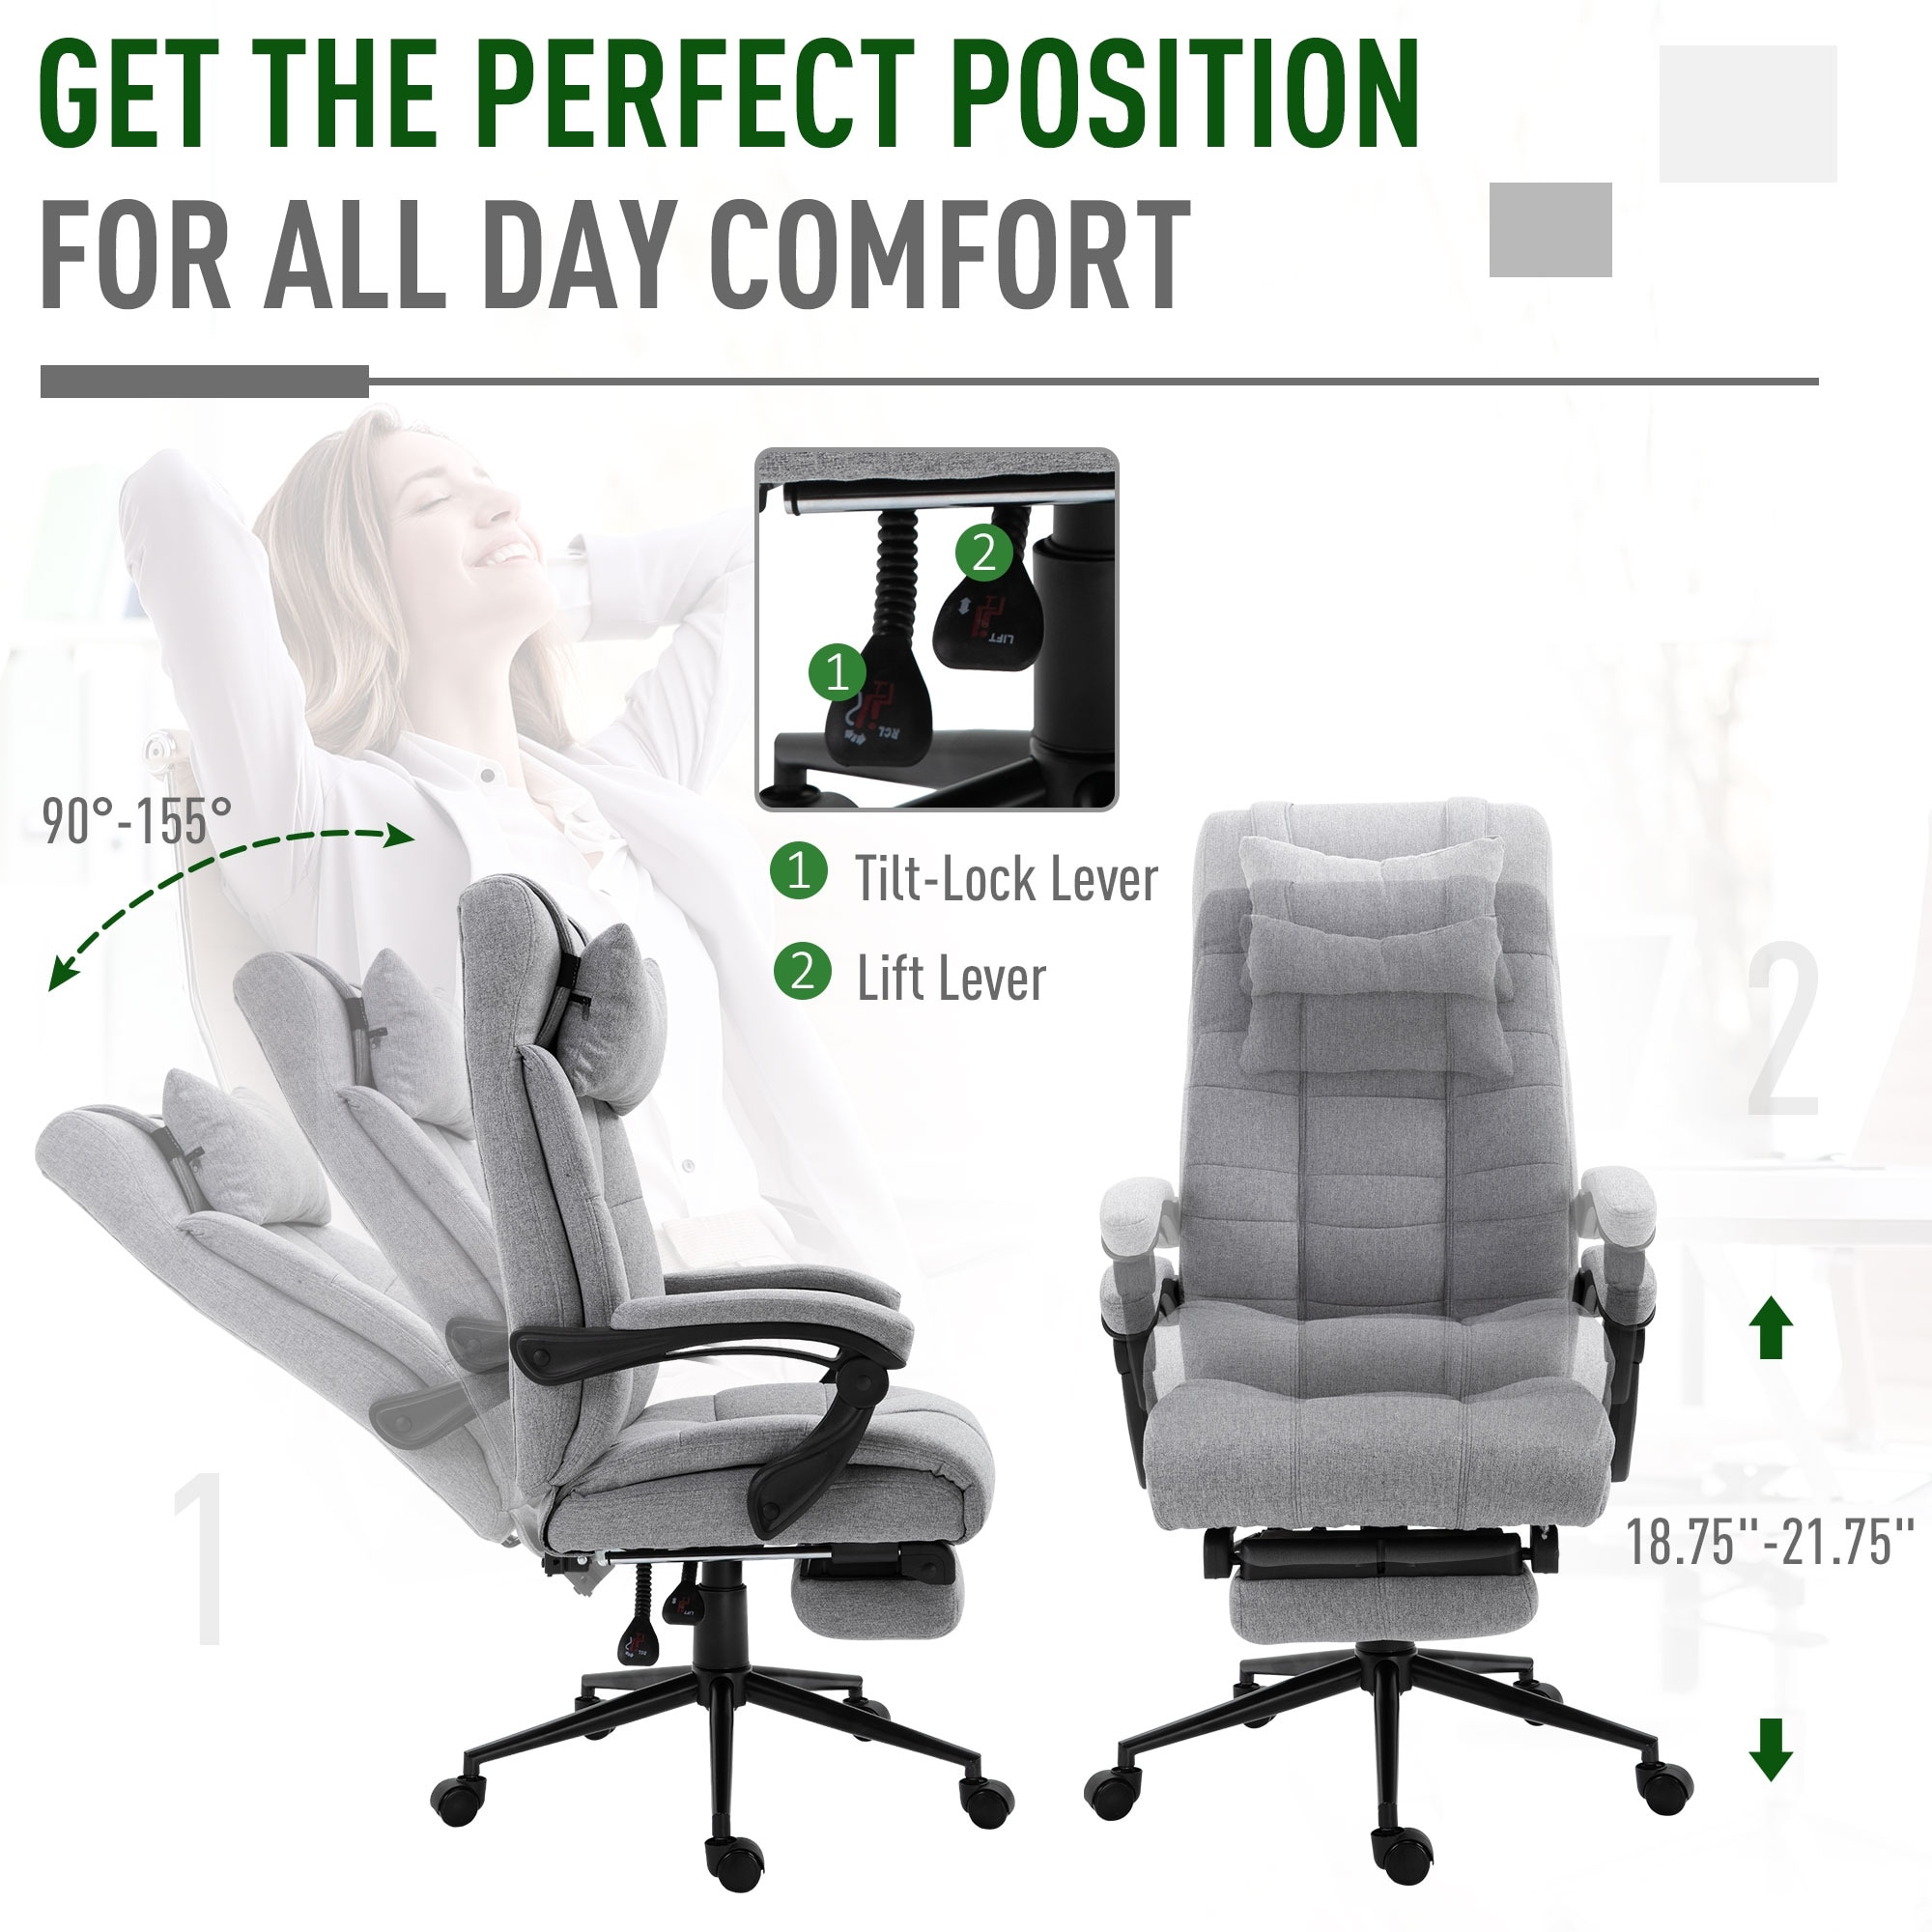 Vinsetto High-Back Vibration Massaging Office Chair, Reclining Office Chair  with USB Port, Remote Control and Footrest - On Sale - Bed Bath & Beyond -  36742161